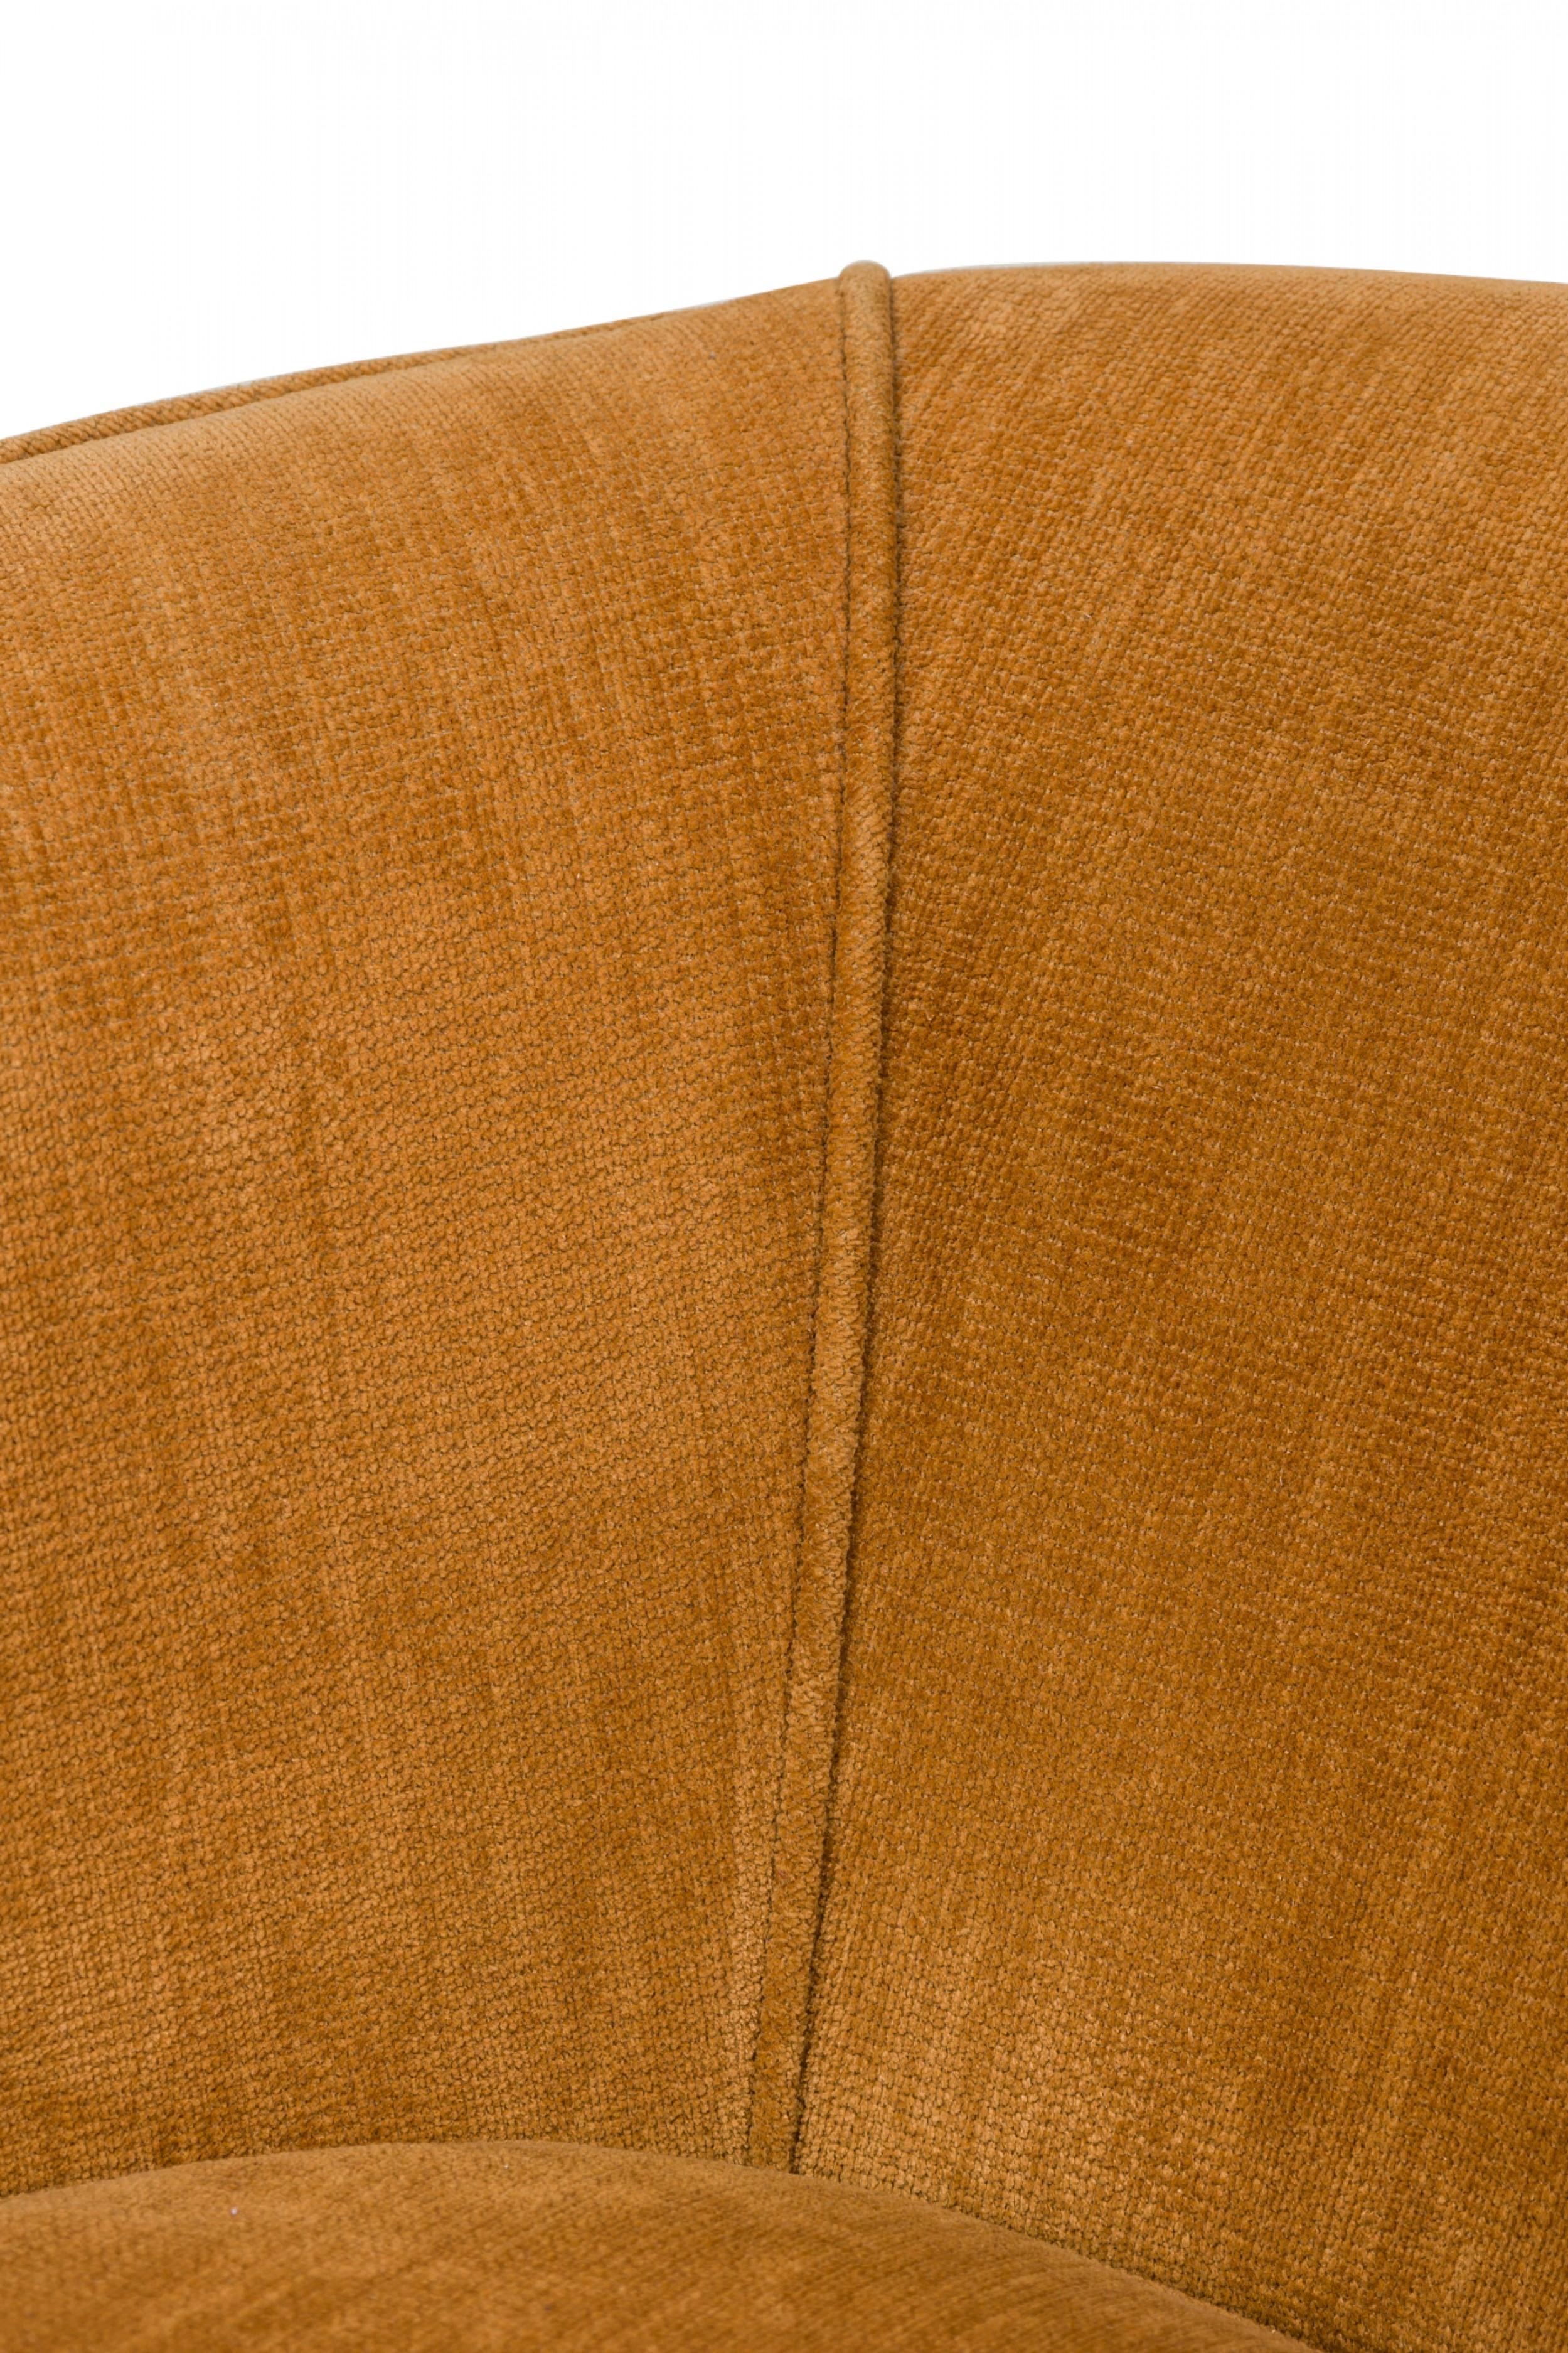 Milo Baughman for Thayer Coggin Light Brown Velour Horseshoe Lounge Armchair In Good Condition For Sale In New York, NY